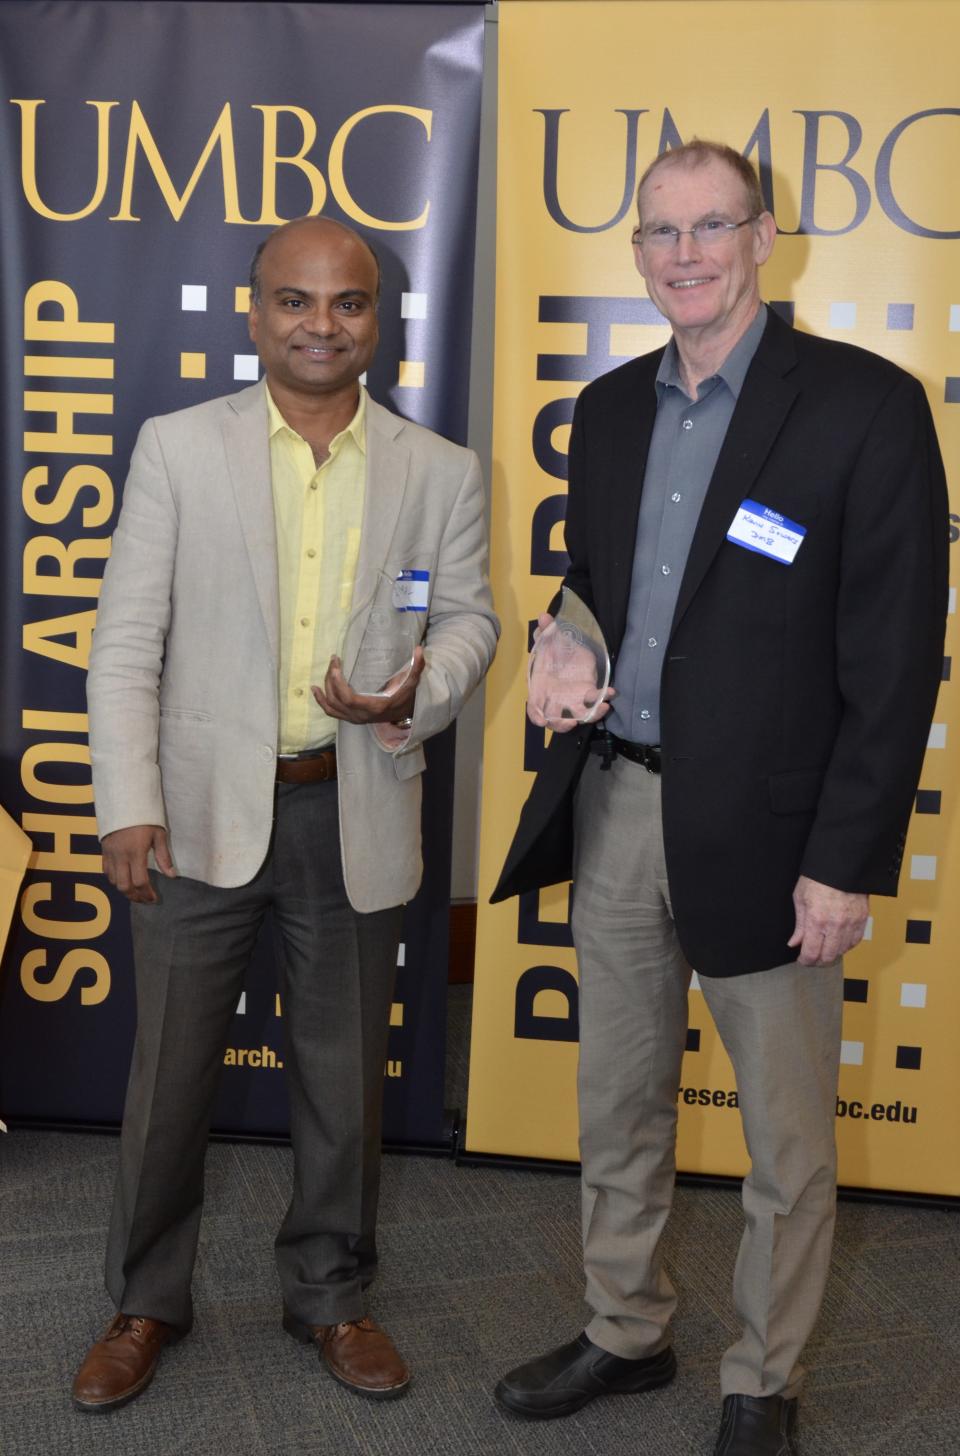 Kevin Sowers and Upal Ghosh holding trophies in front of a black and gold UMBC poster